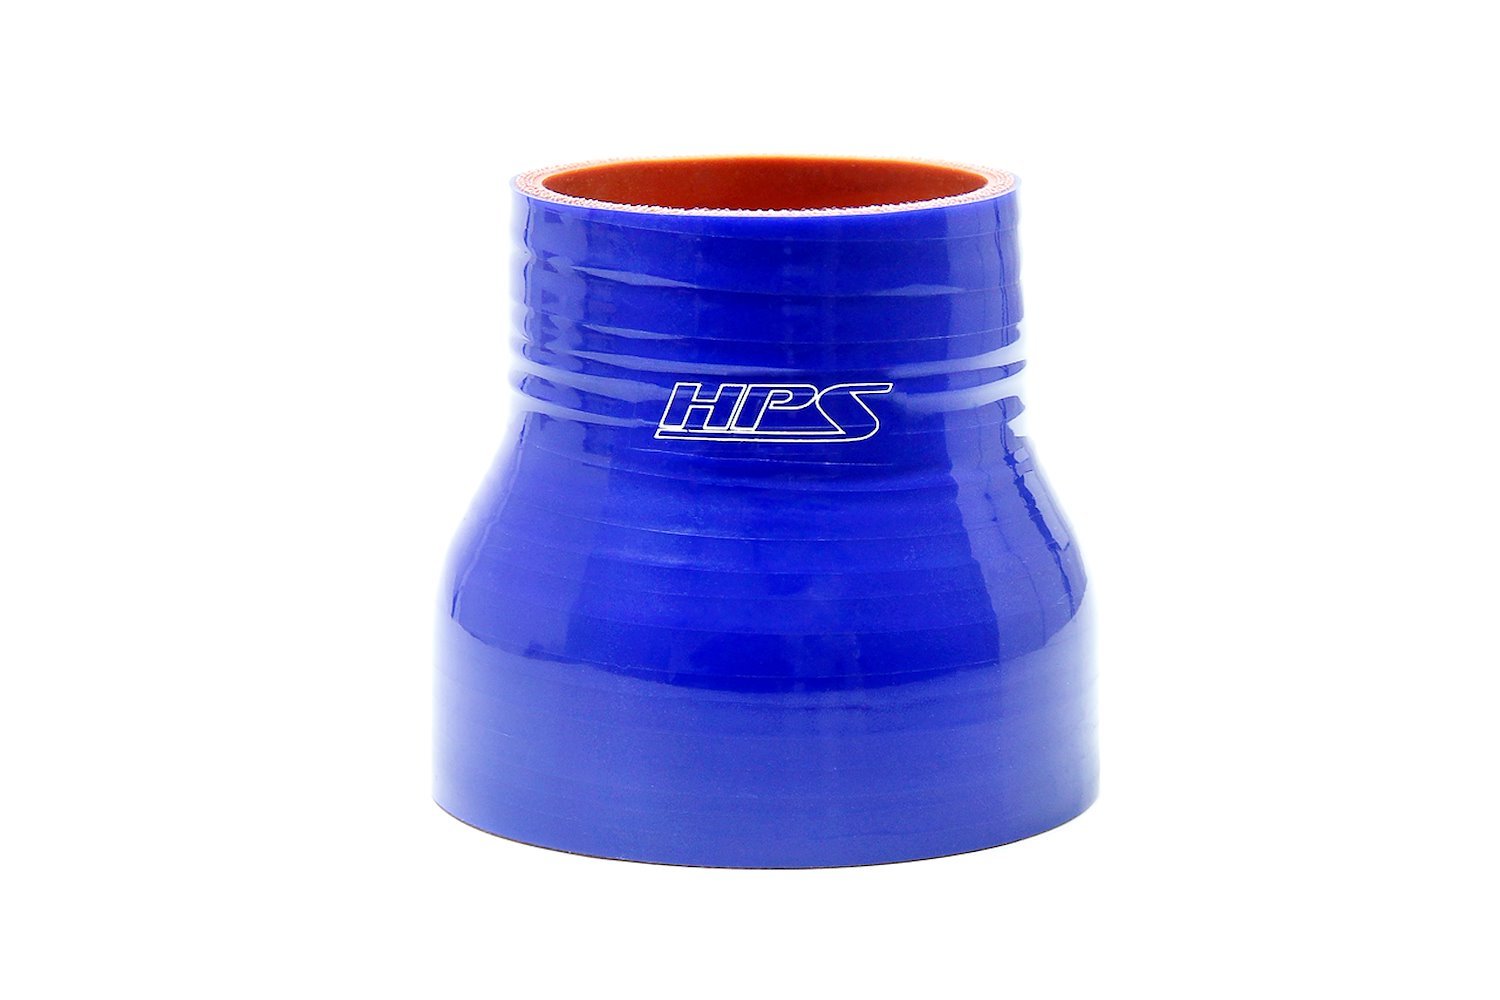 HTSR-200-275-BLUE Silicone Reducer Hose, High-Temp 4-Ply Reinforced, 2 in. - 2-3/4 in. ID, 3 in. Long, Blue